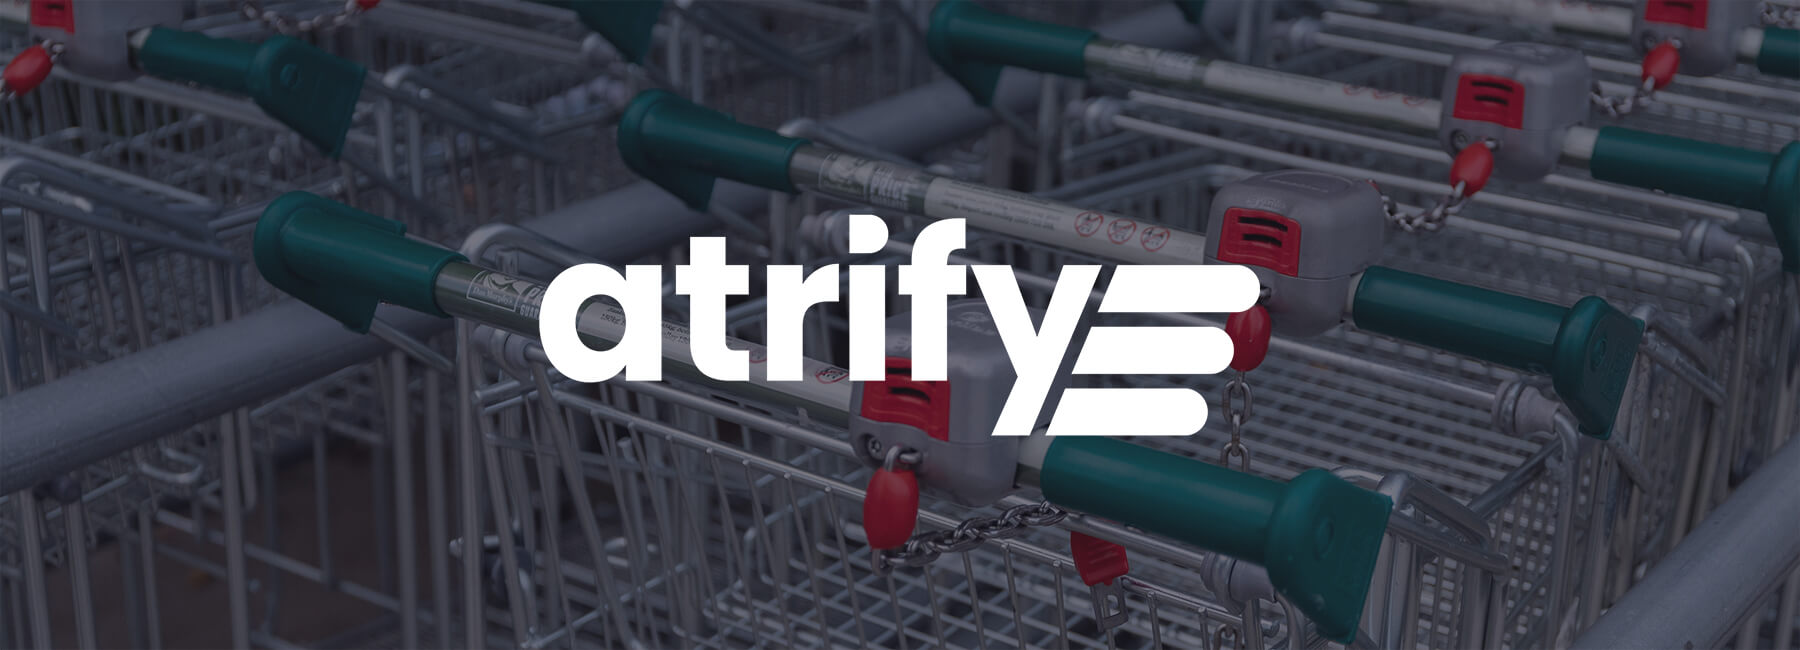 atrify measures all-round customer satisfaction with customer feedback